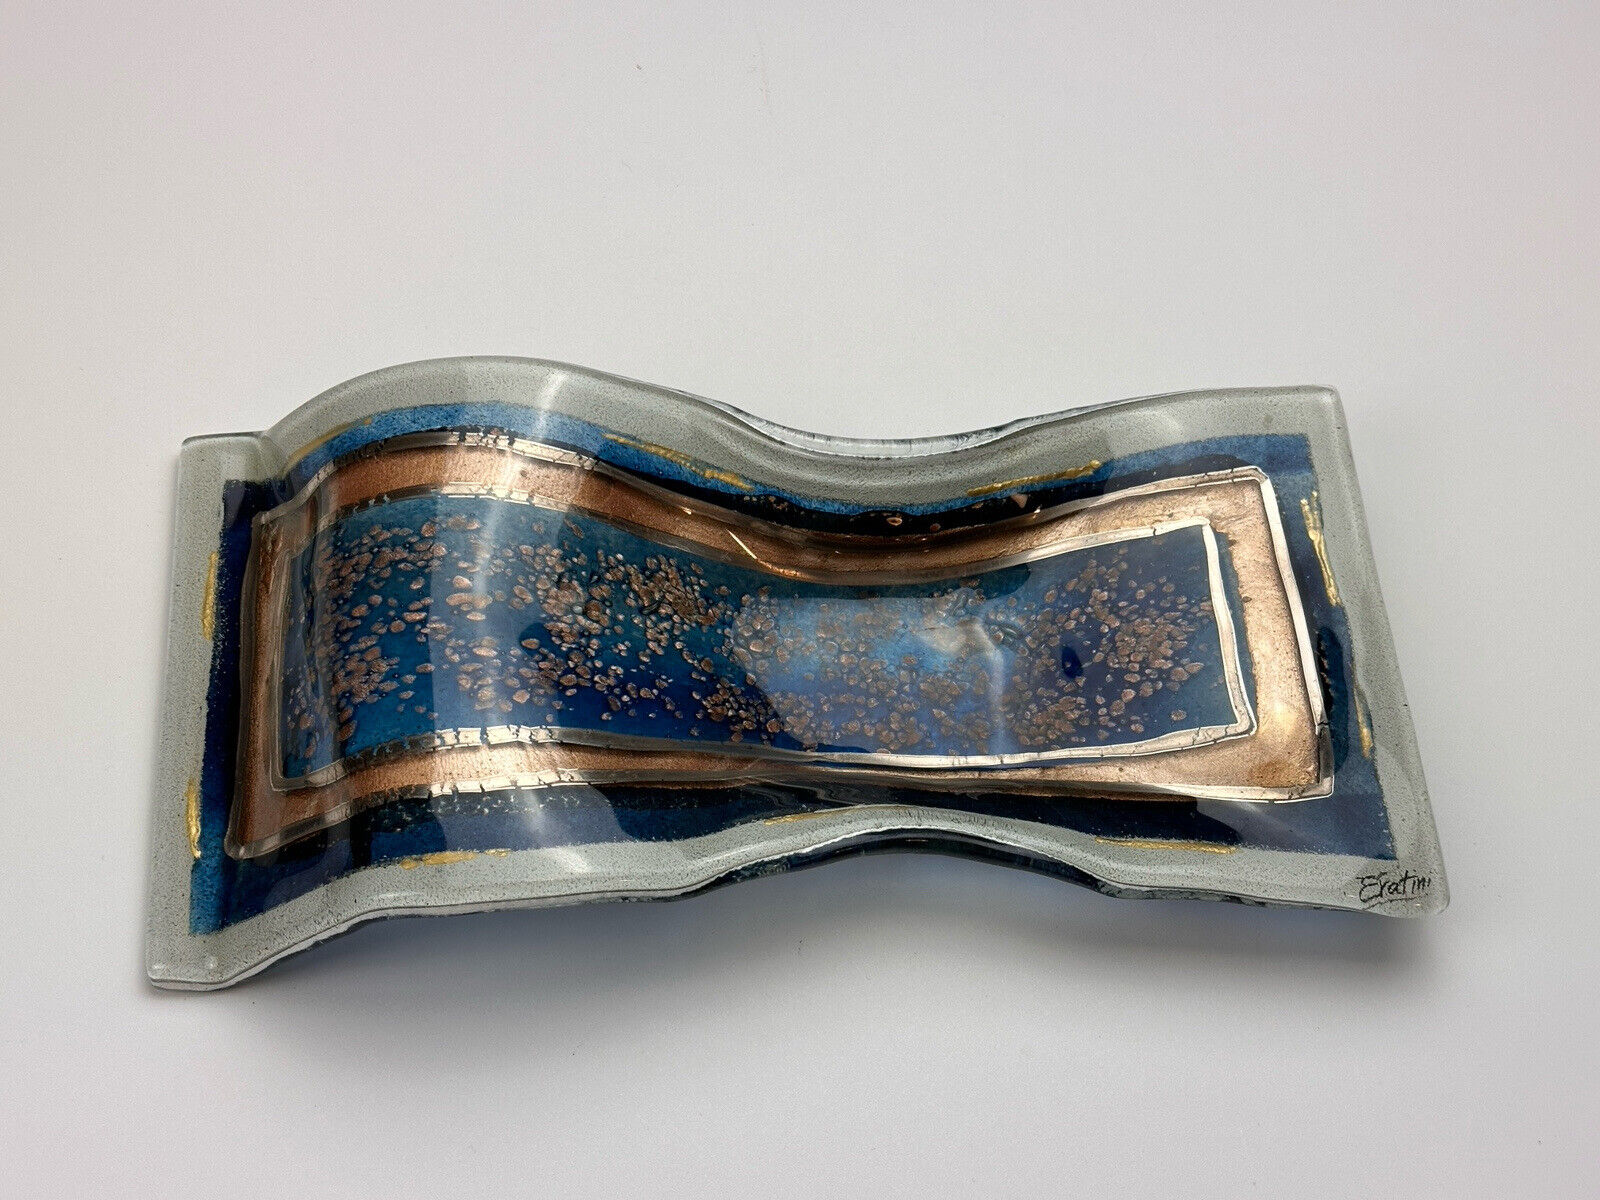 Eratini Hand Crafted In Greece Fused Glass Dish Tray Blue Gold Signed Decorative